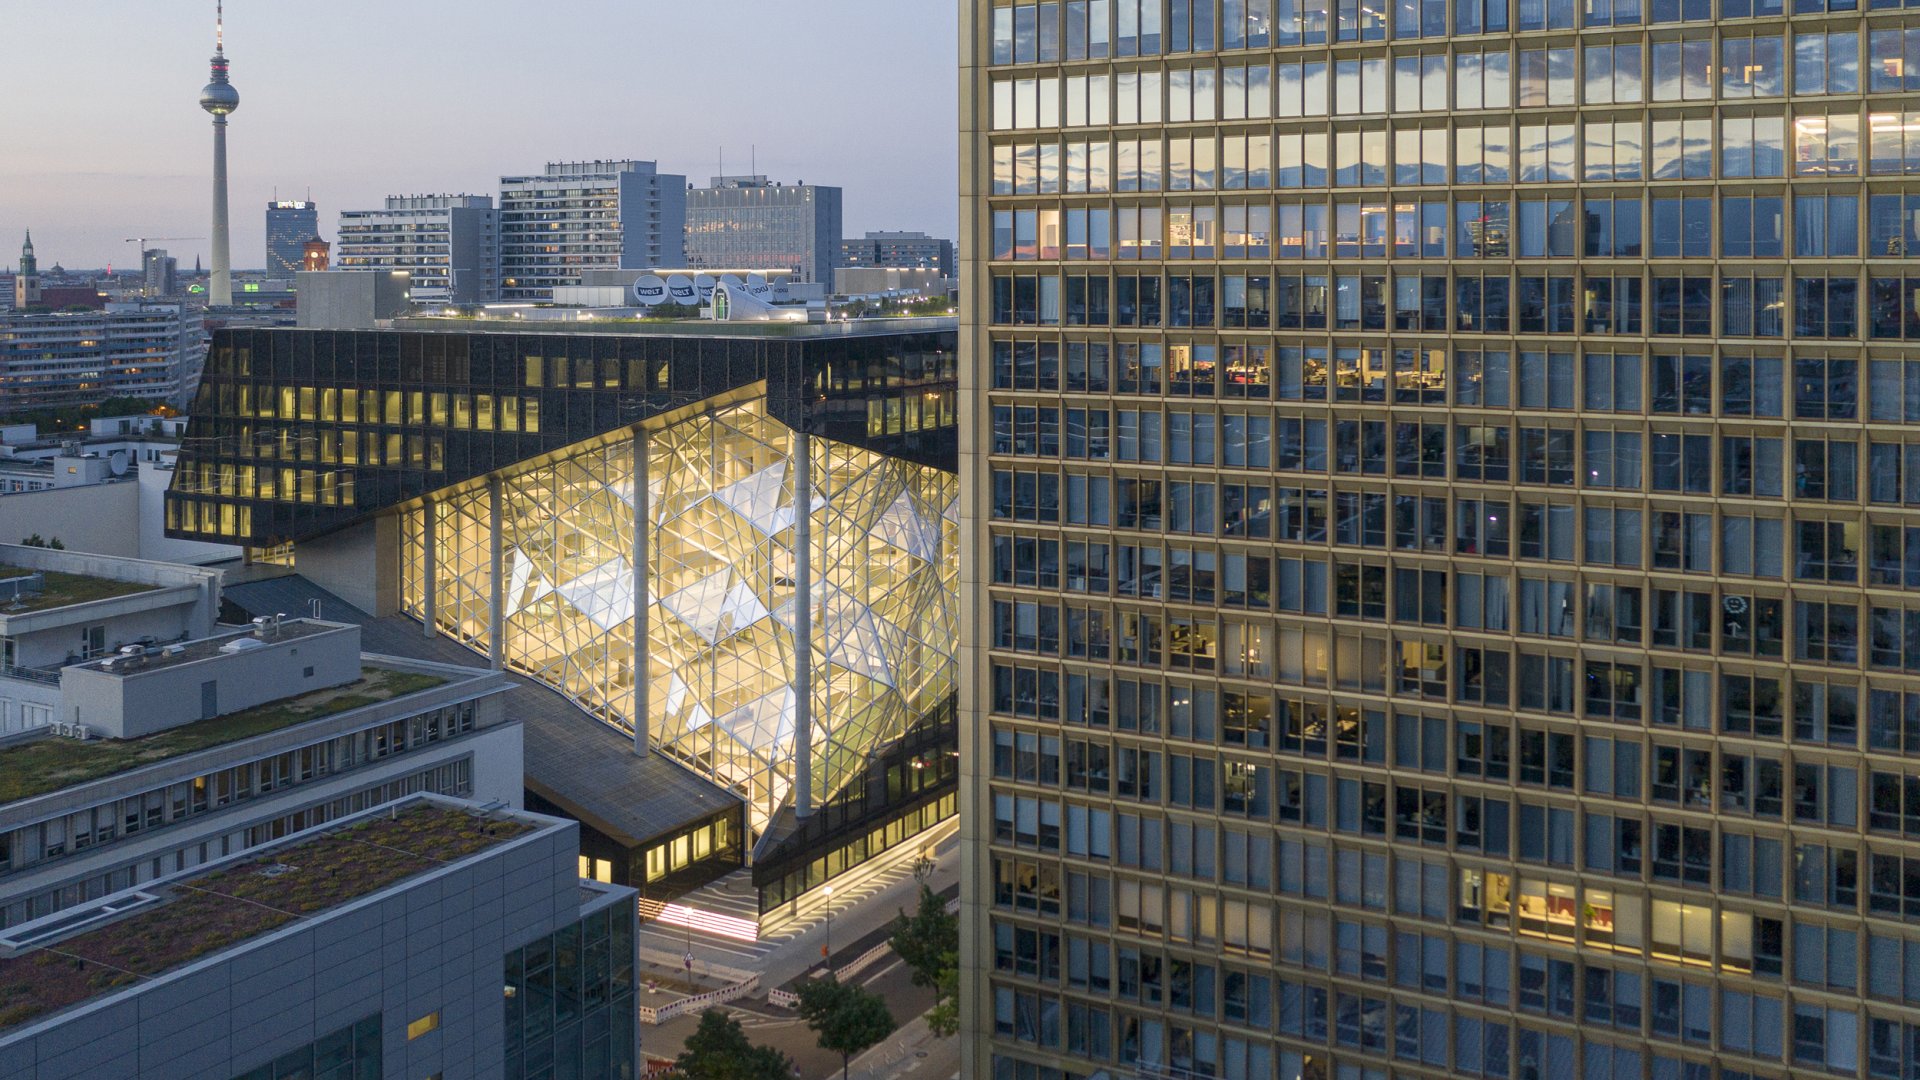 axel_springer_campus_berlin_copyright_laurianghinitoiu_concepteur_lumiere_internal_use_2_of_5_r.jpg